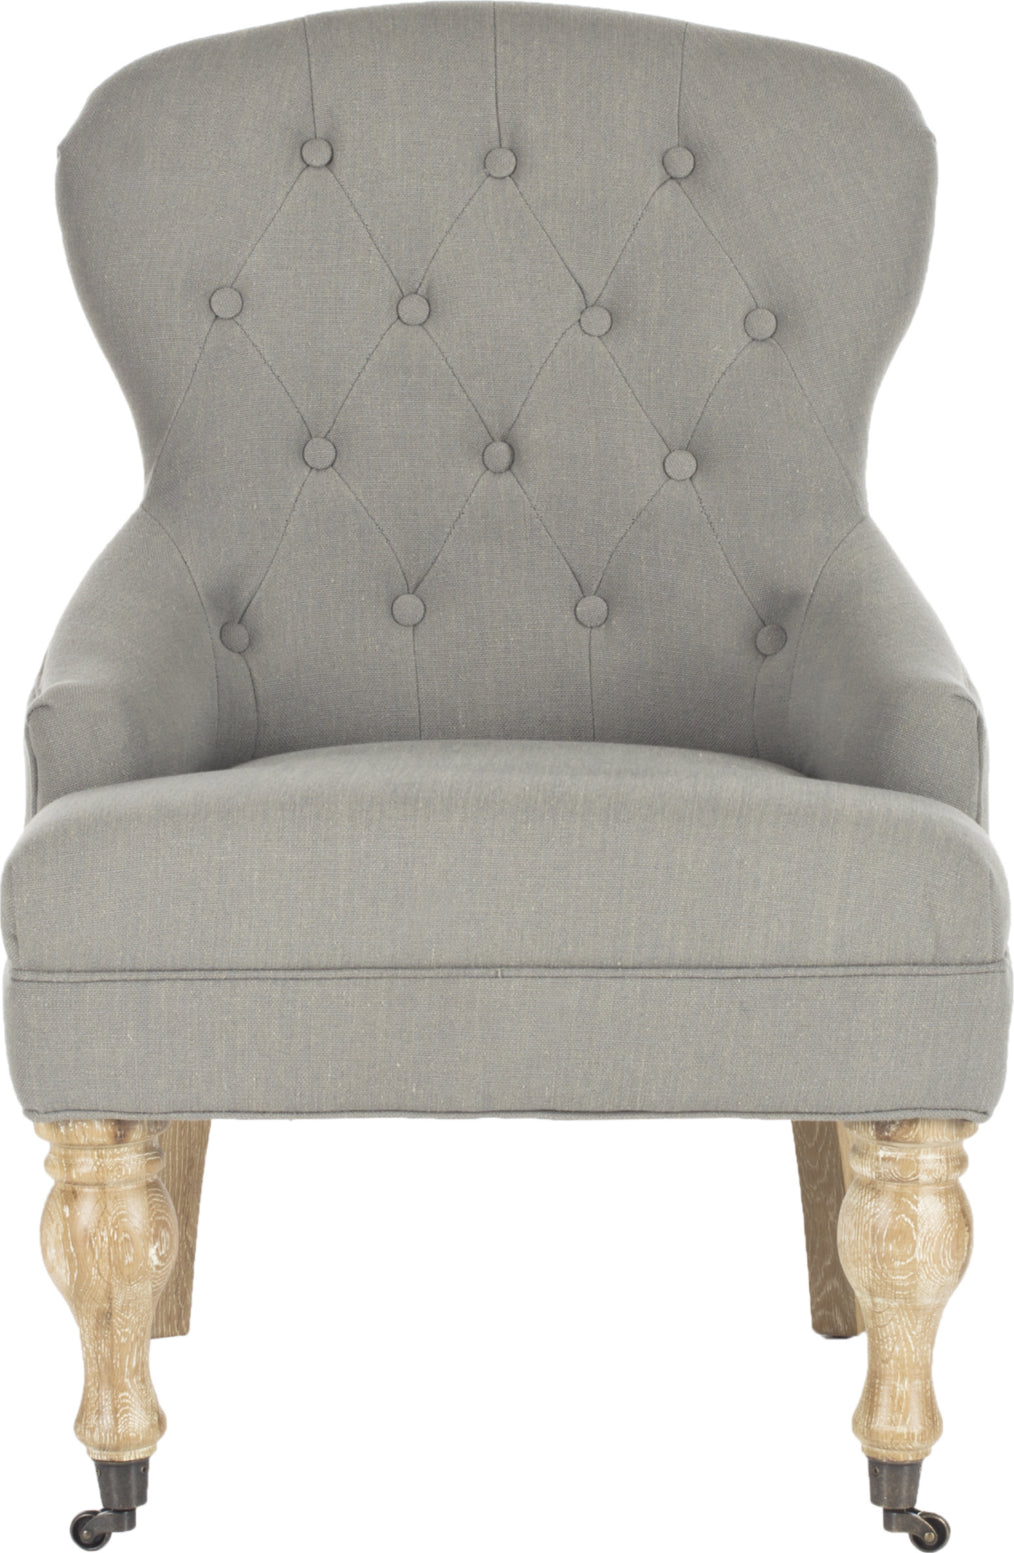 Safavieh Falcon Tufted Arm Chair Granite and White Washed Furniture main image